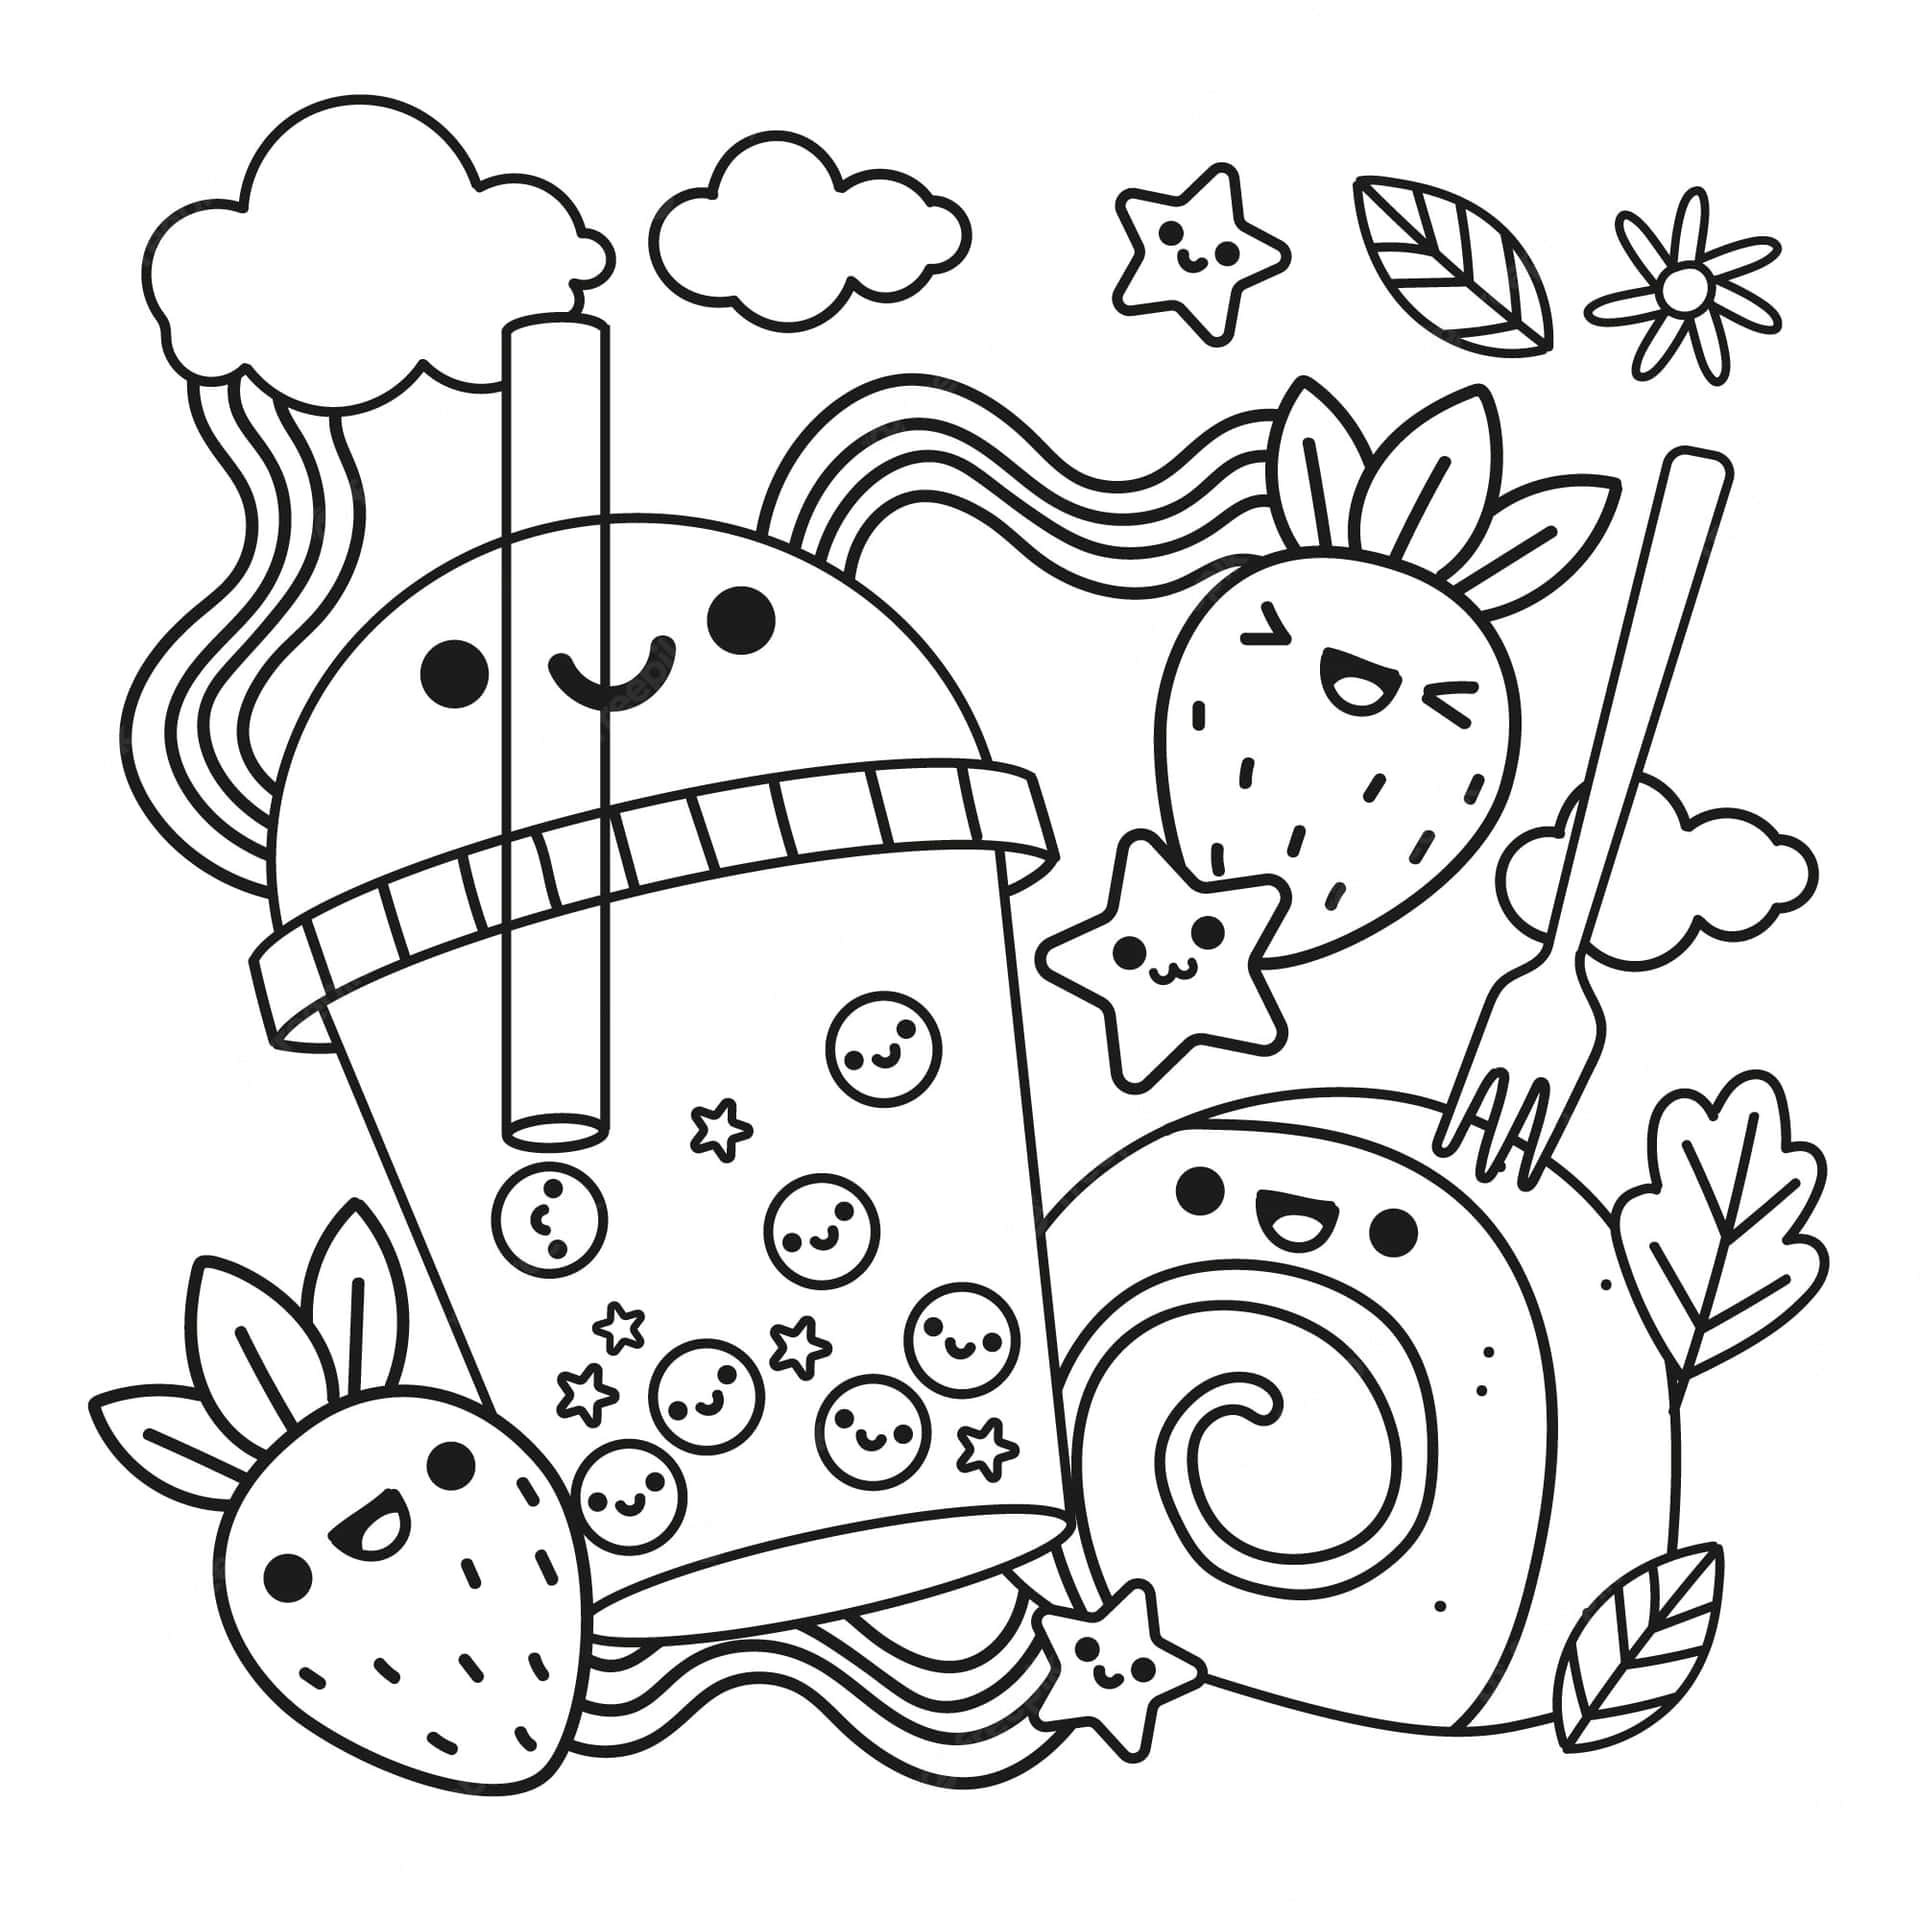 Download kawaii fruit shake and bread coloring pictures